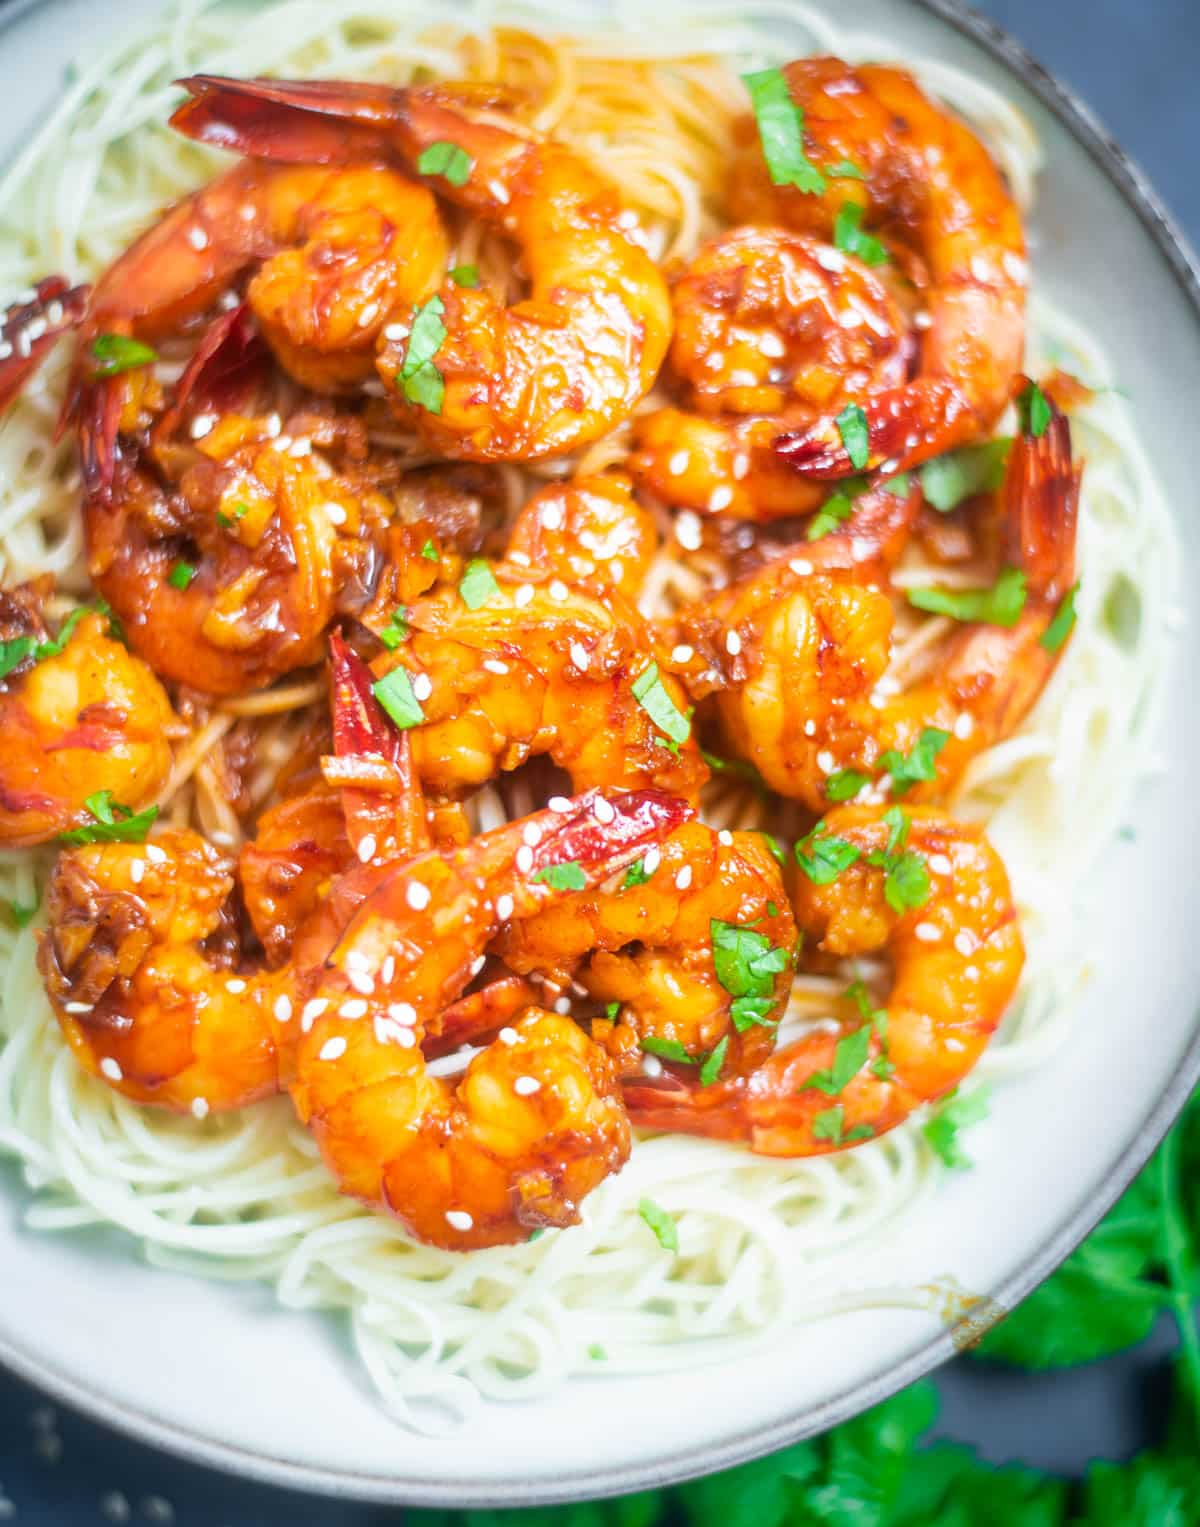 Prawns in honey garlic chili sauce on a bed of noodles